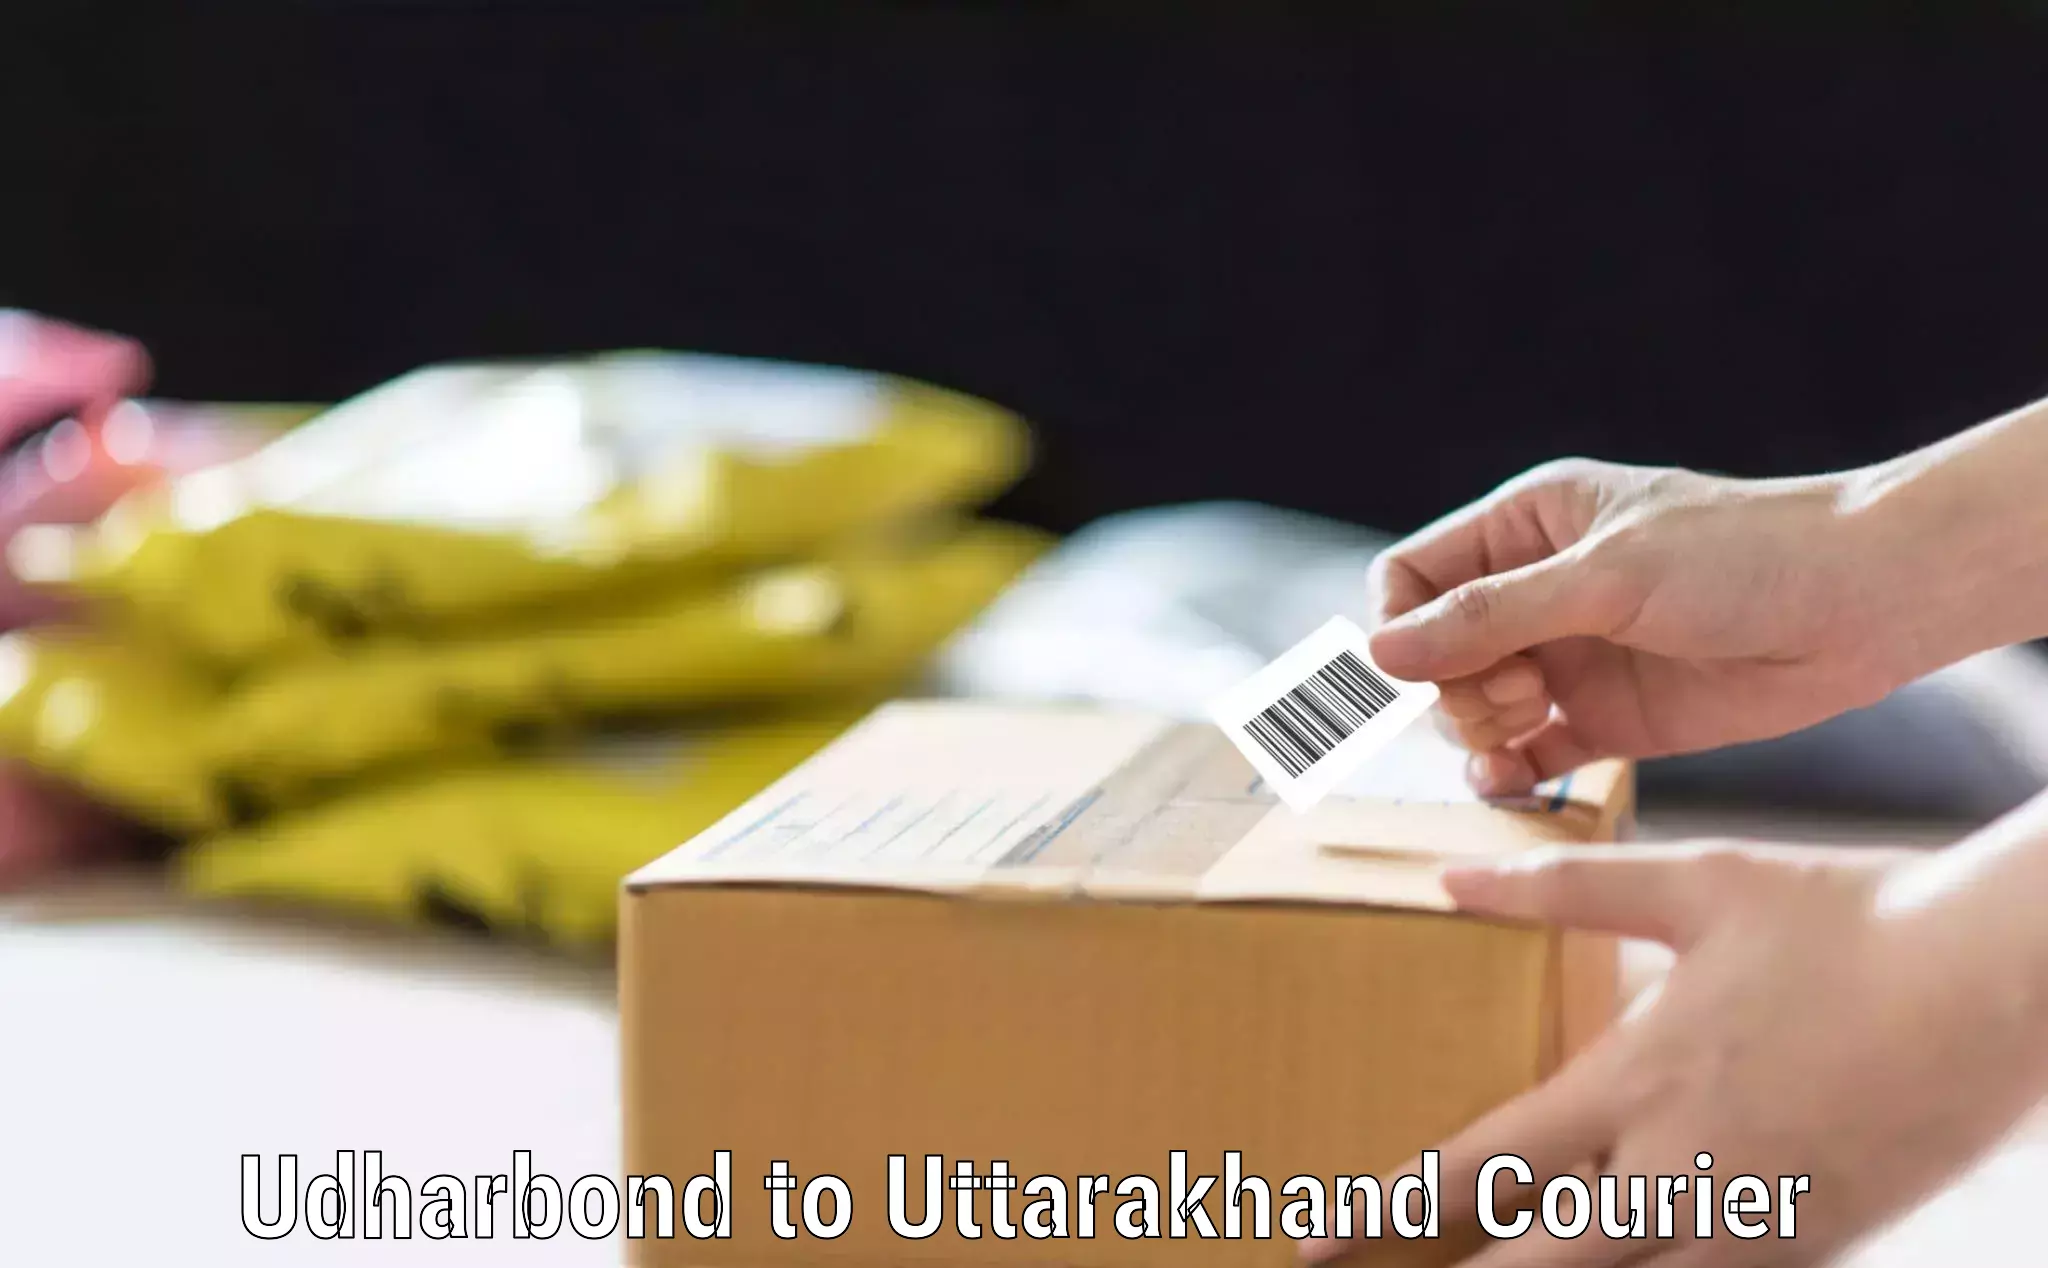 Trackable baggage shipping Udharbond to Pauri Garhwal